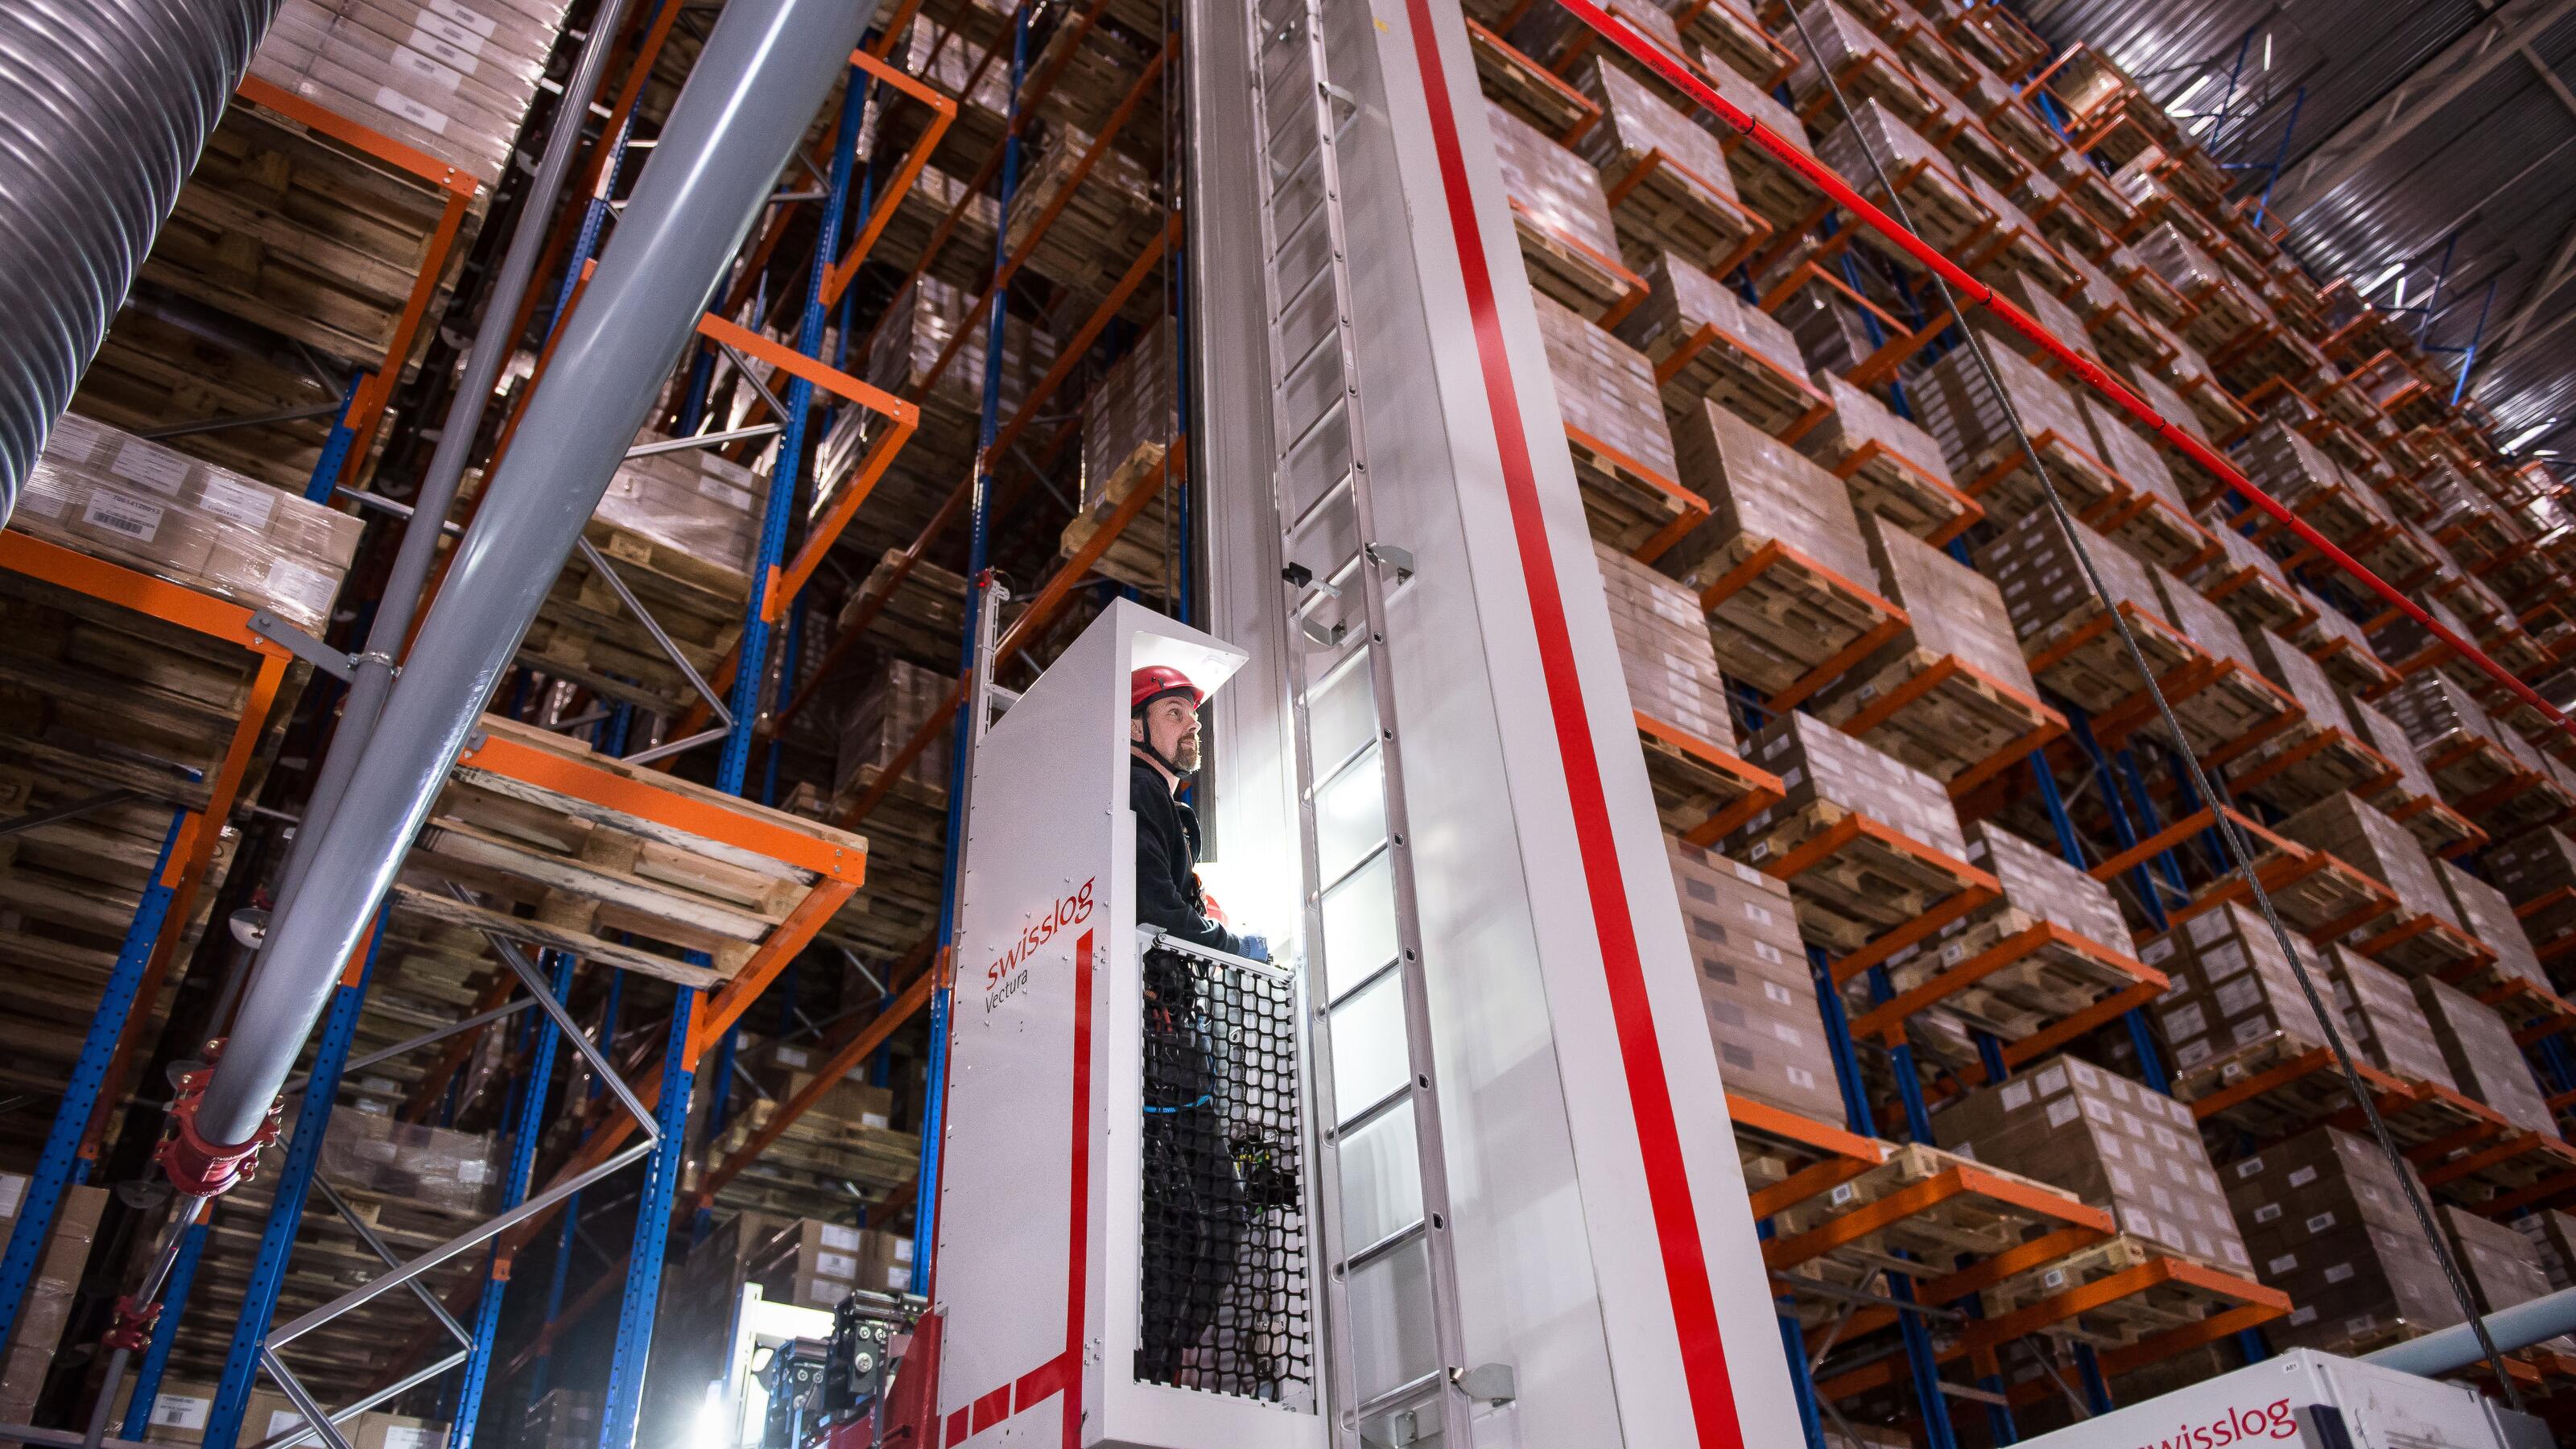 Automated Pallet Warehouse can be maintained with stacker cranes